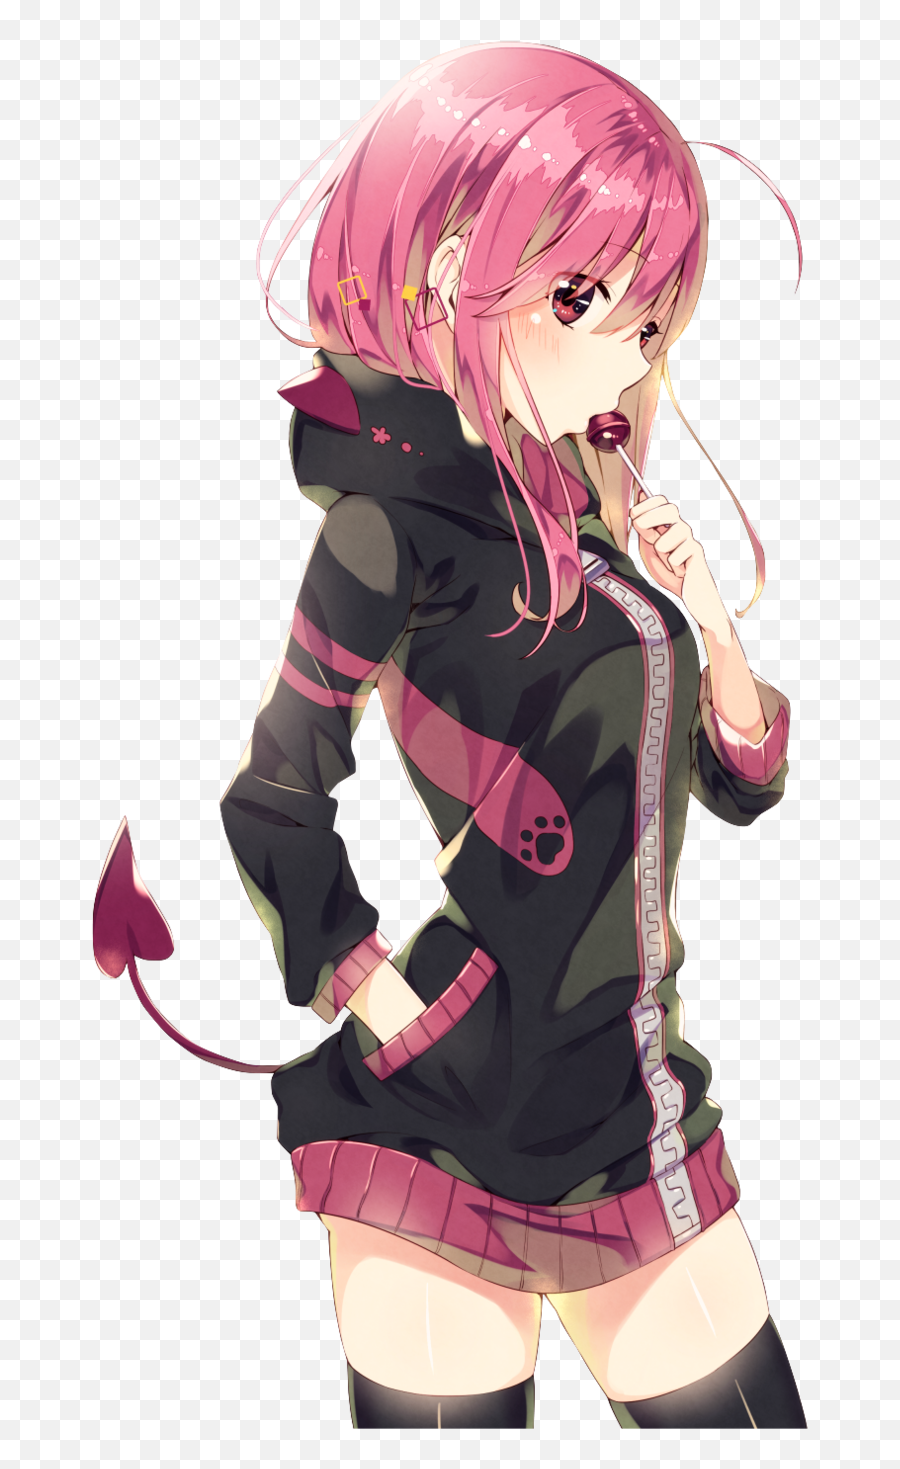 Anime Girl Hot Pink Hair Png Image With - Anime Bad Girl Pink Hair Emoji,Hot Anime Girl Png